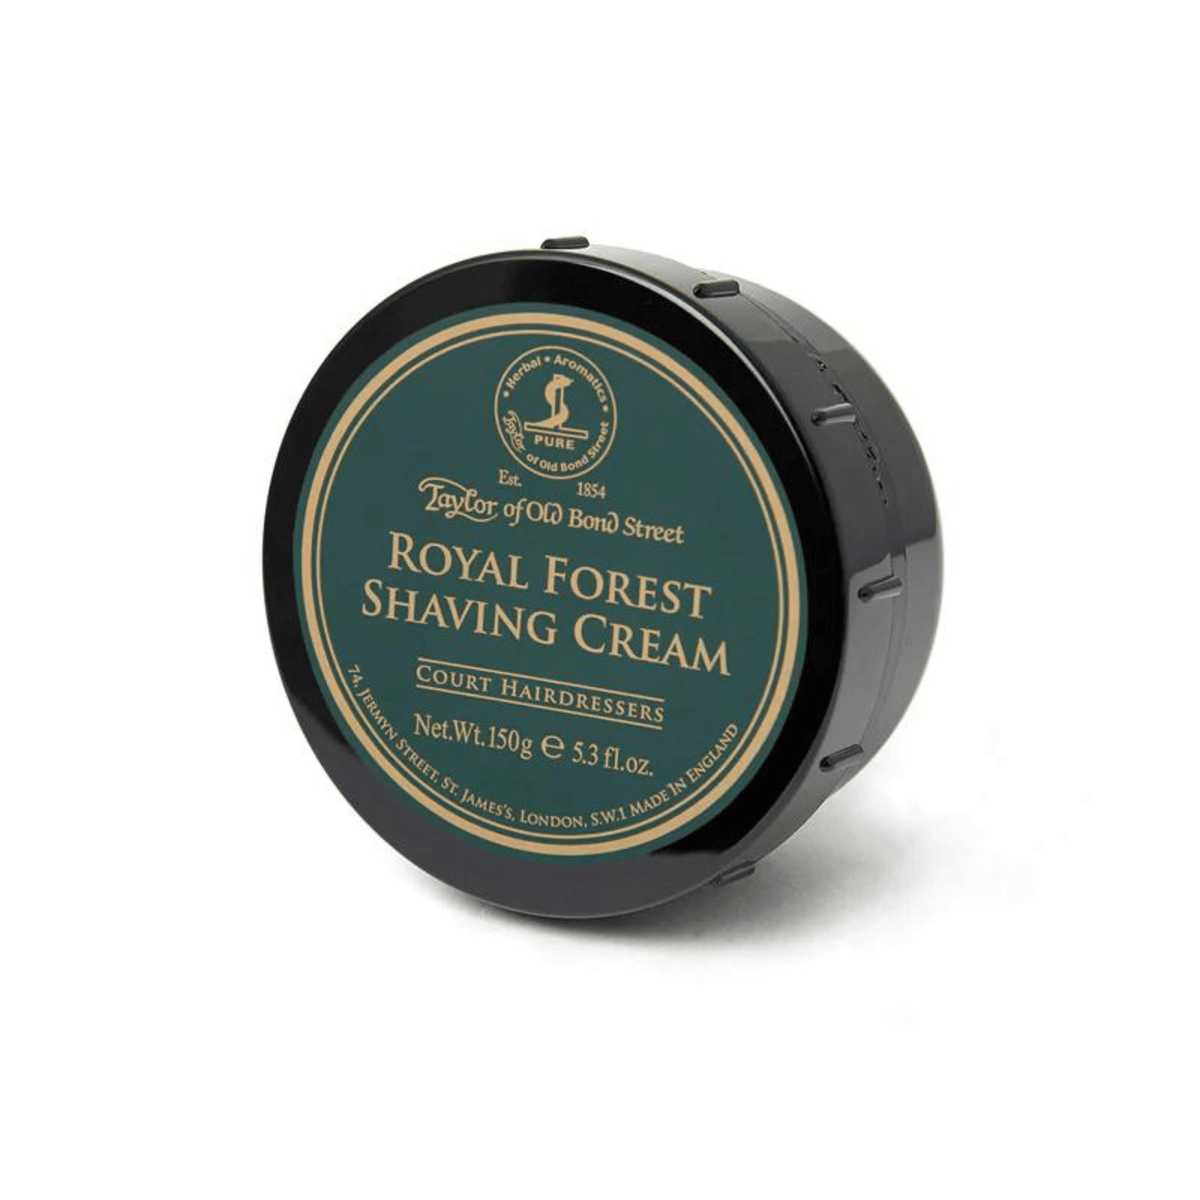 Primary Image of Royal Forest Shaving Cream Bowl